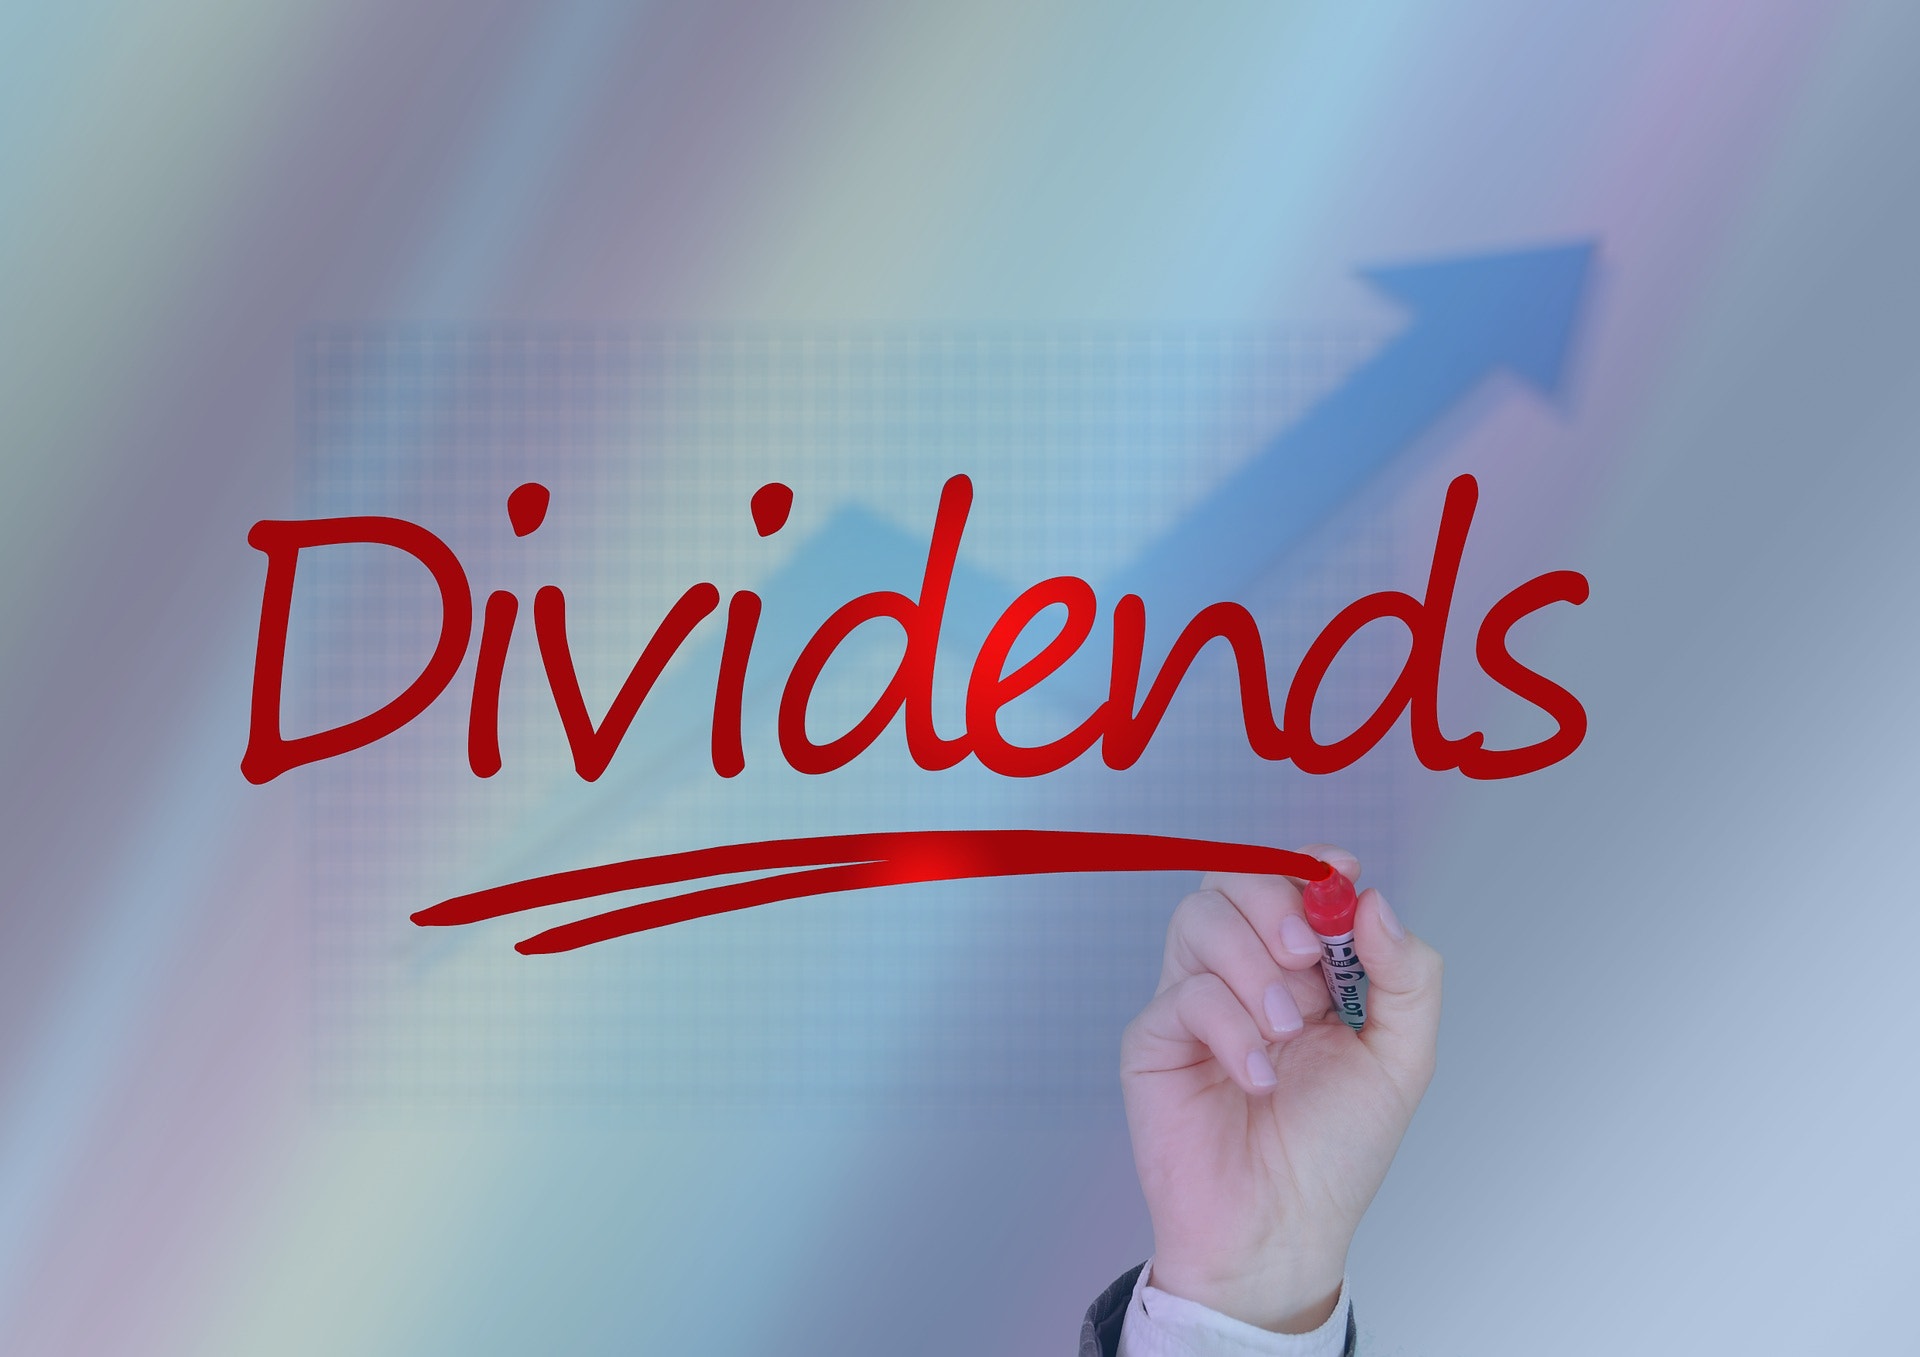 What Are 10 Of The Most Popular Dividend Stocks?